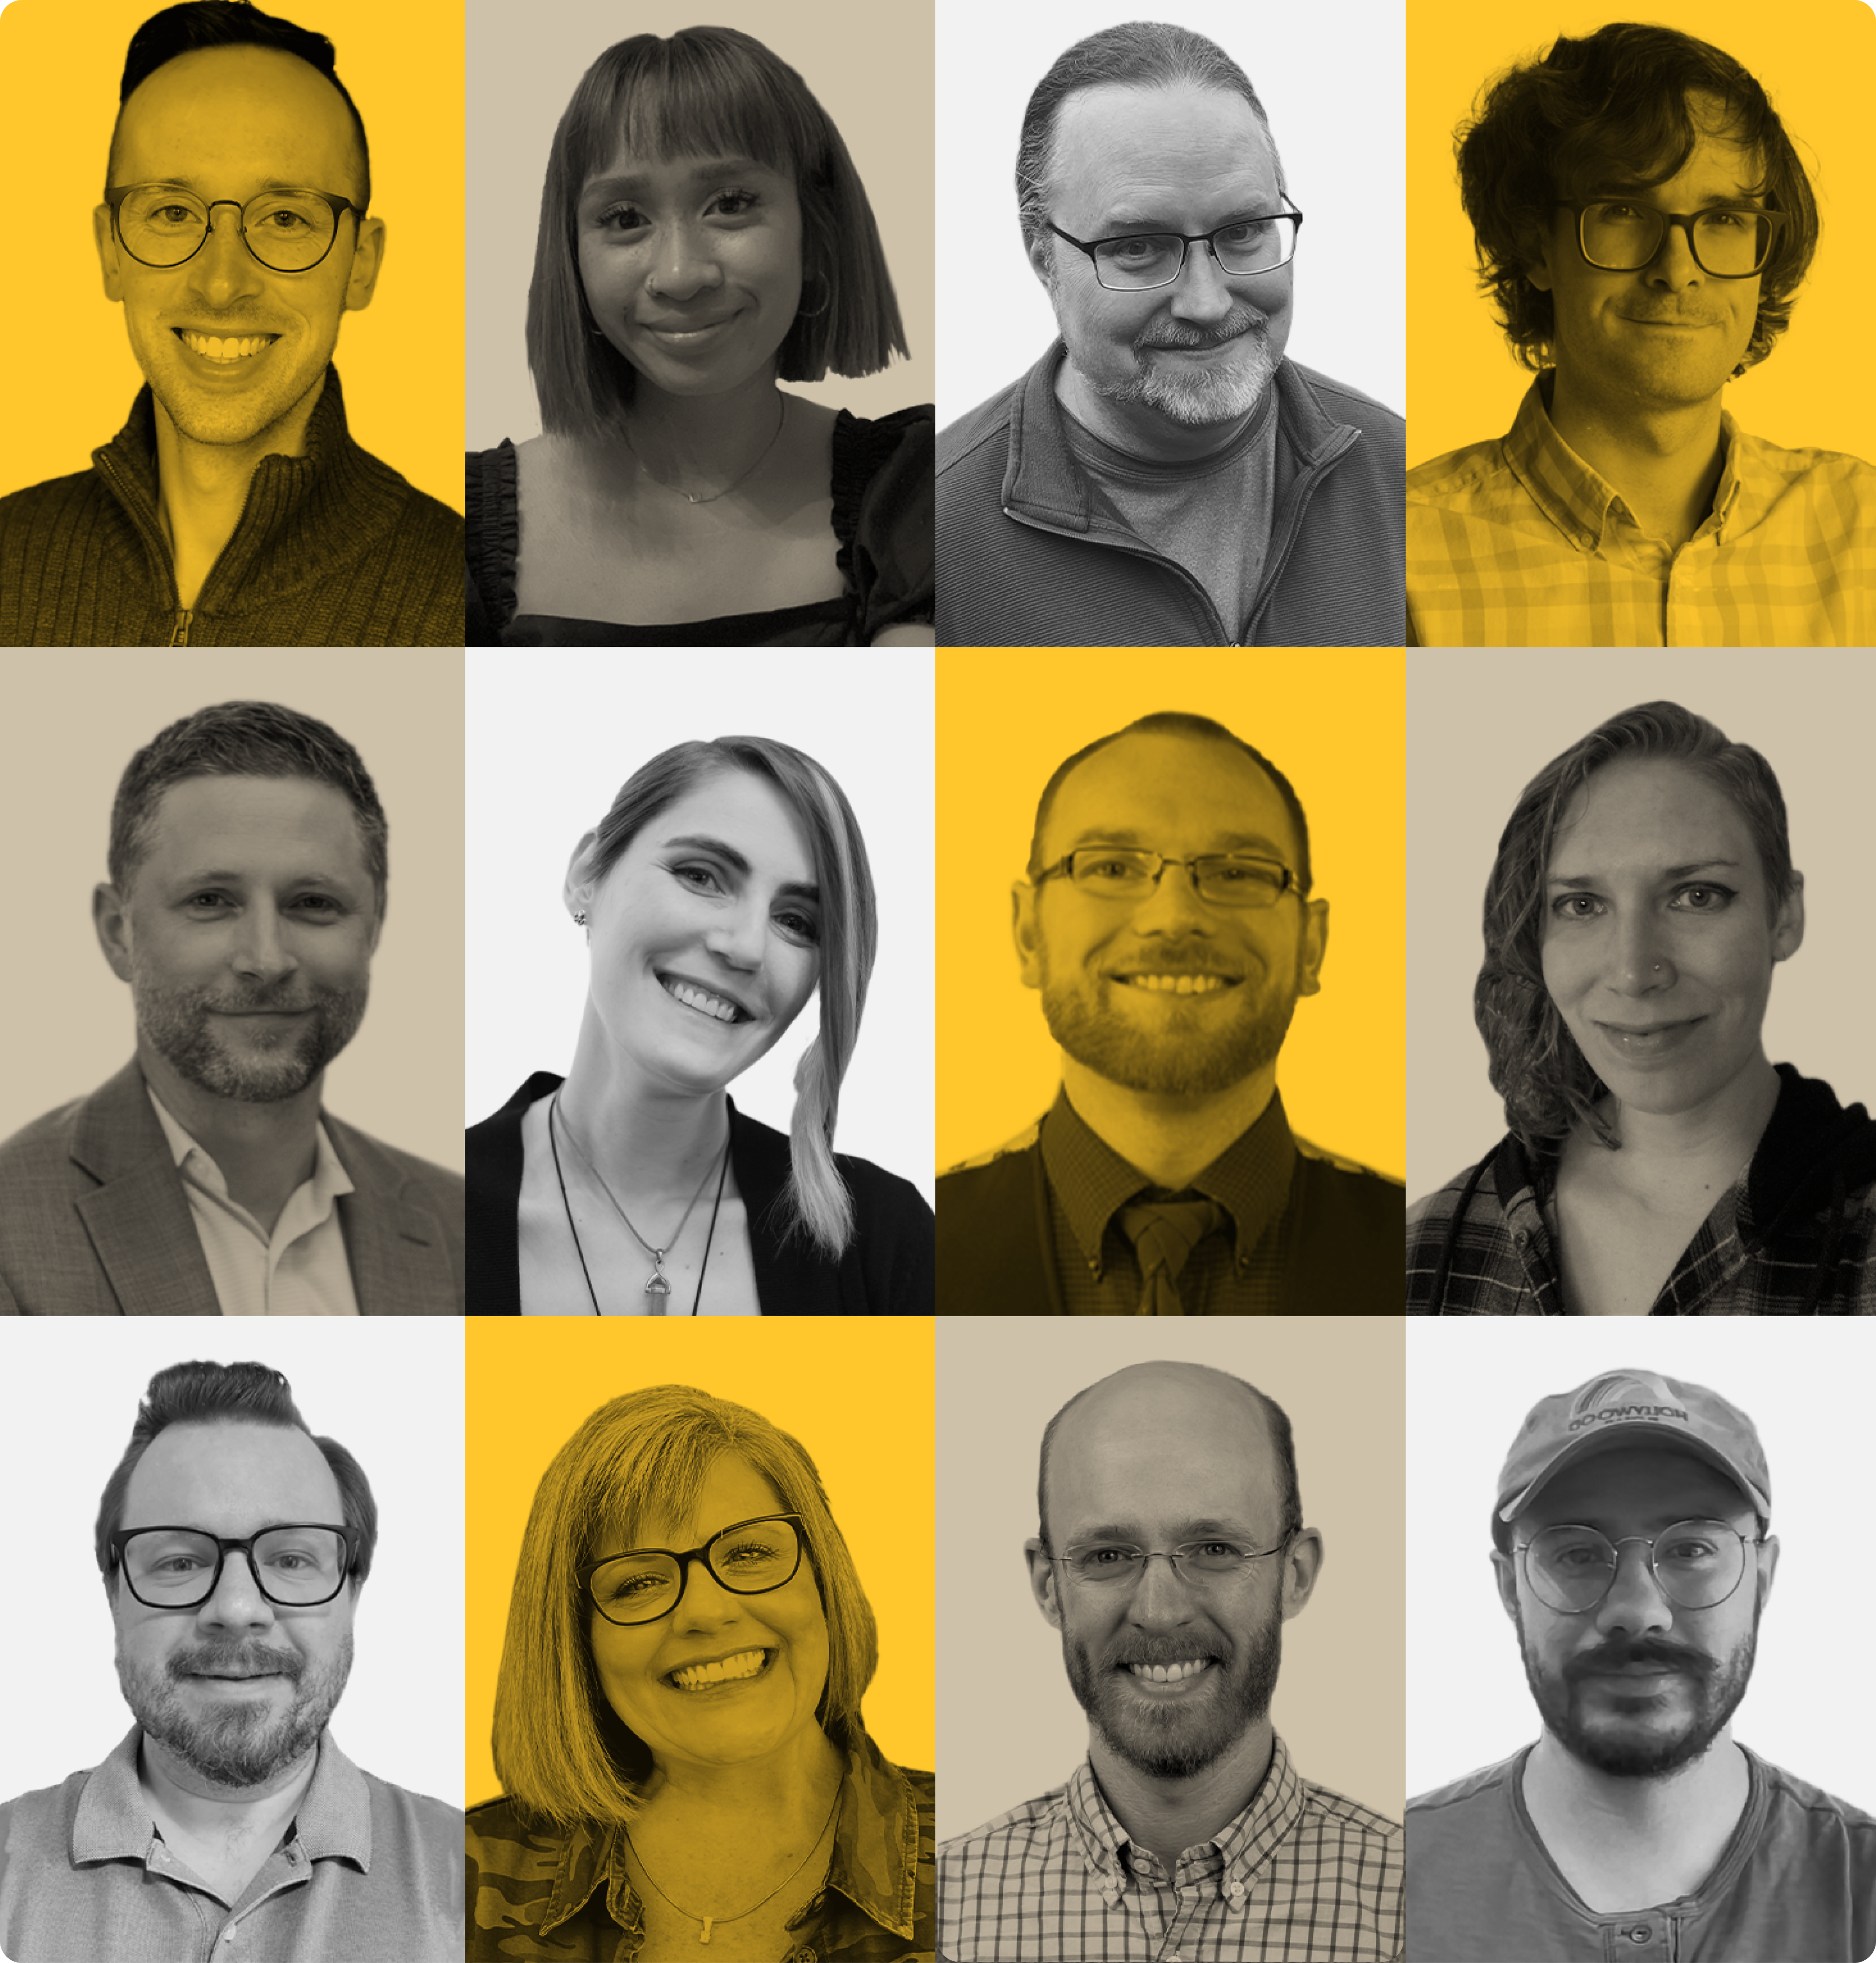 Photo collage of Twenty Ideas employees with gray, tan, and yellow filters applied in patchwork design.